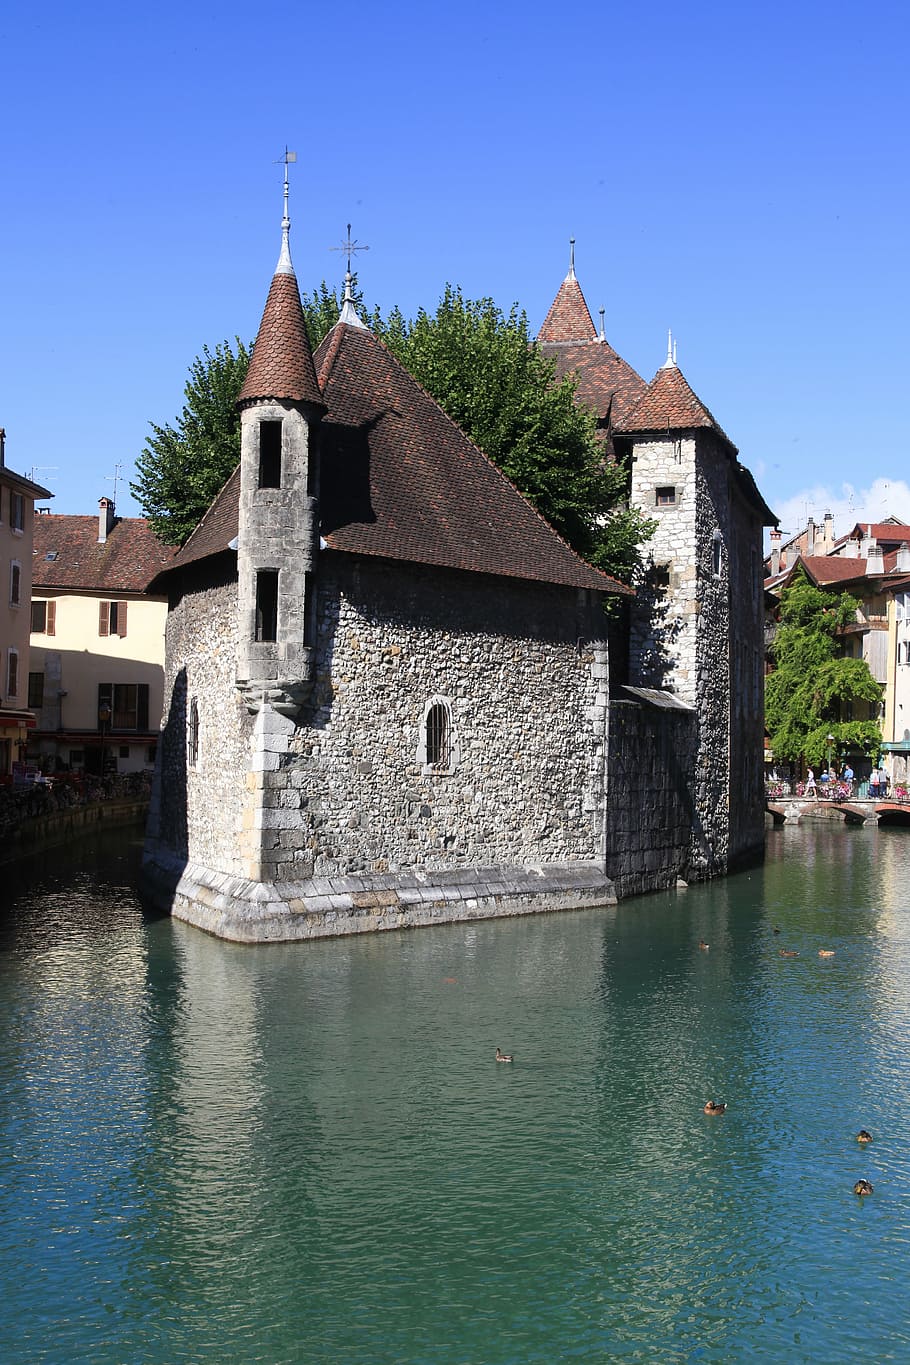 annecy, lake, prison, former, monument, water, sky, city, fortress, pierre